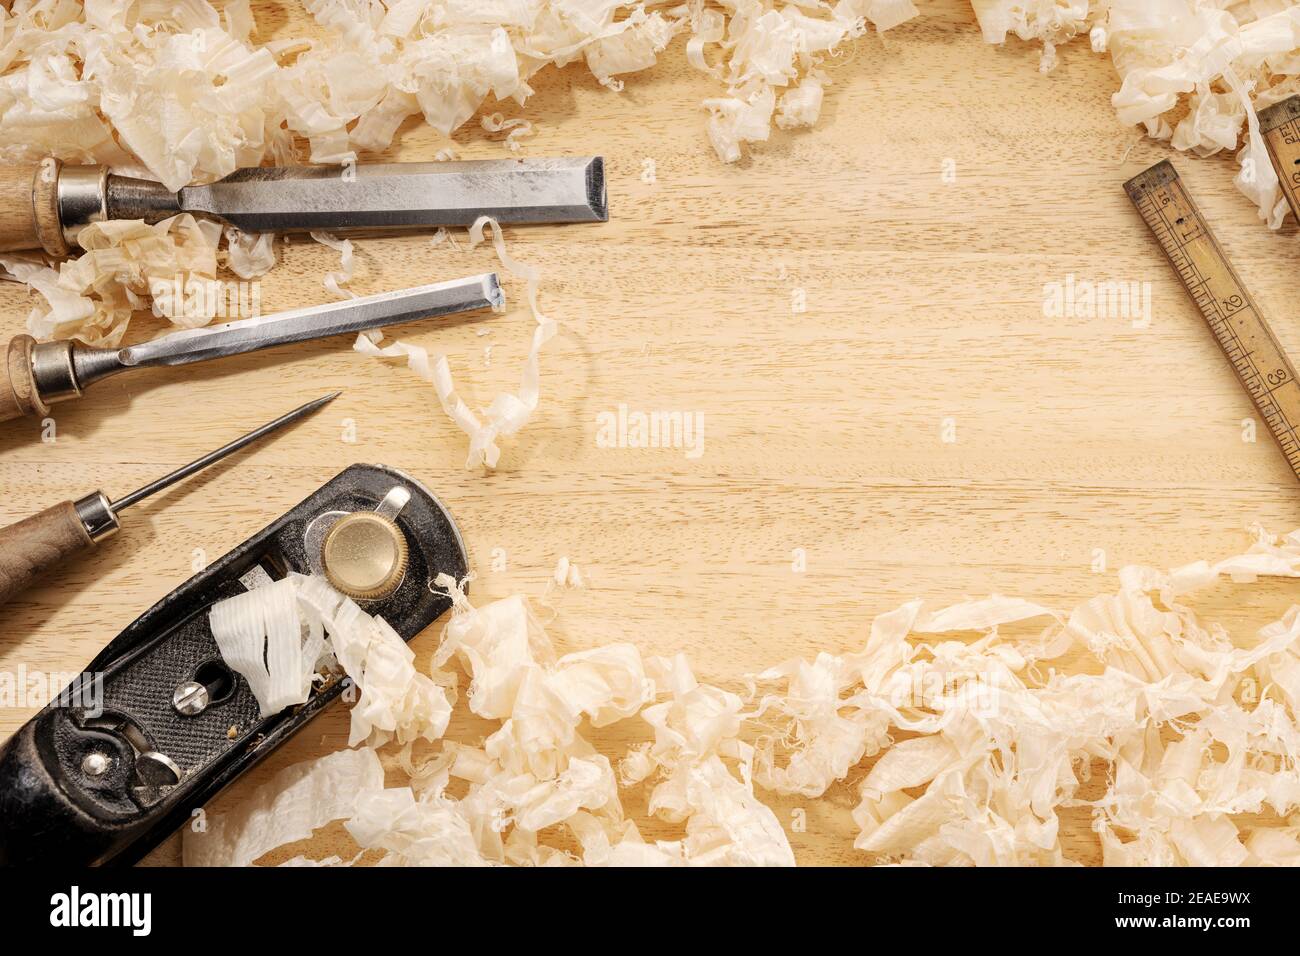 Carpentry or woodworking background with copy space. Old carpentry tools and wood shavings on a workbench. Woodworking, craftsmanship and handwork con Stock Photo